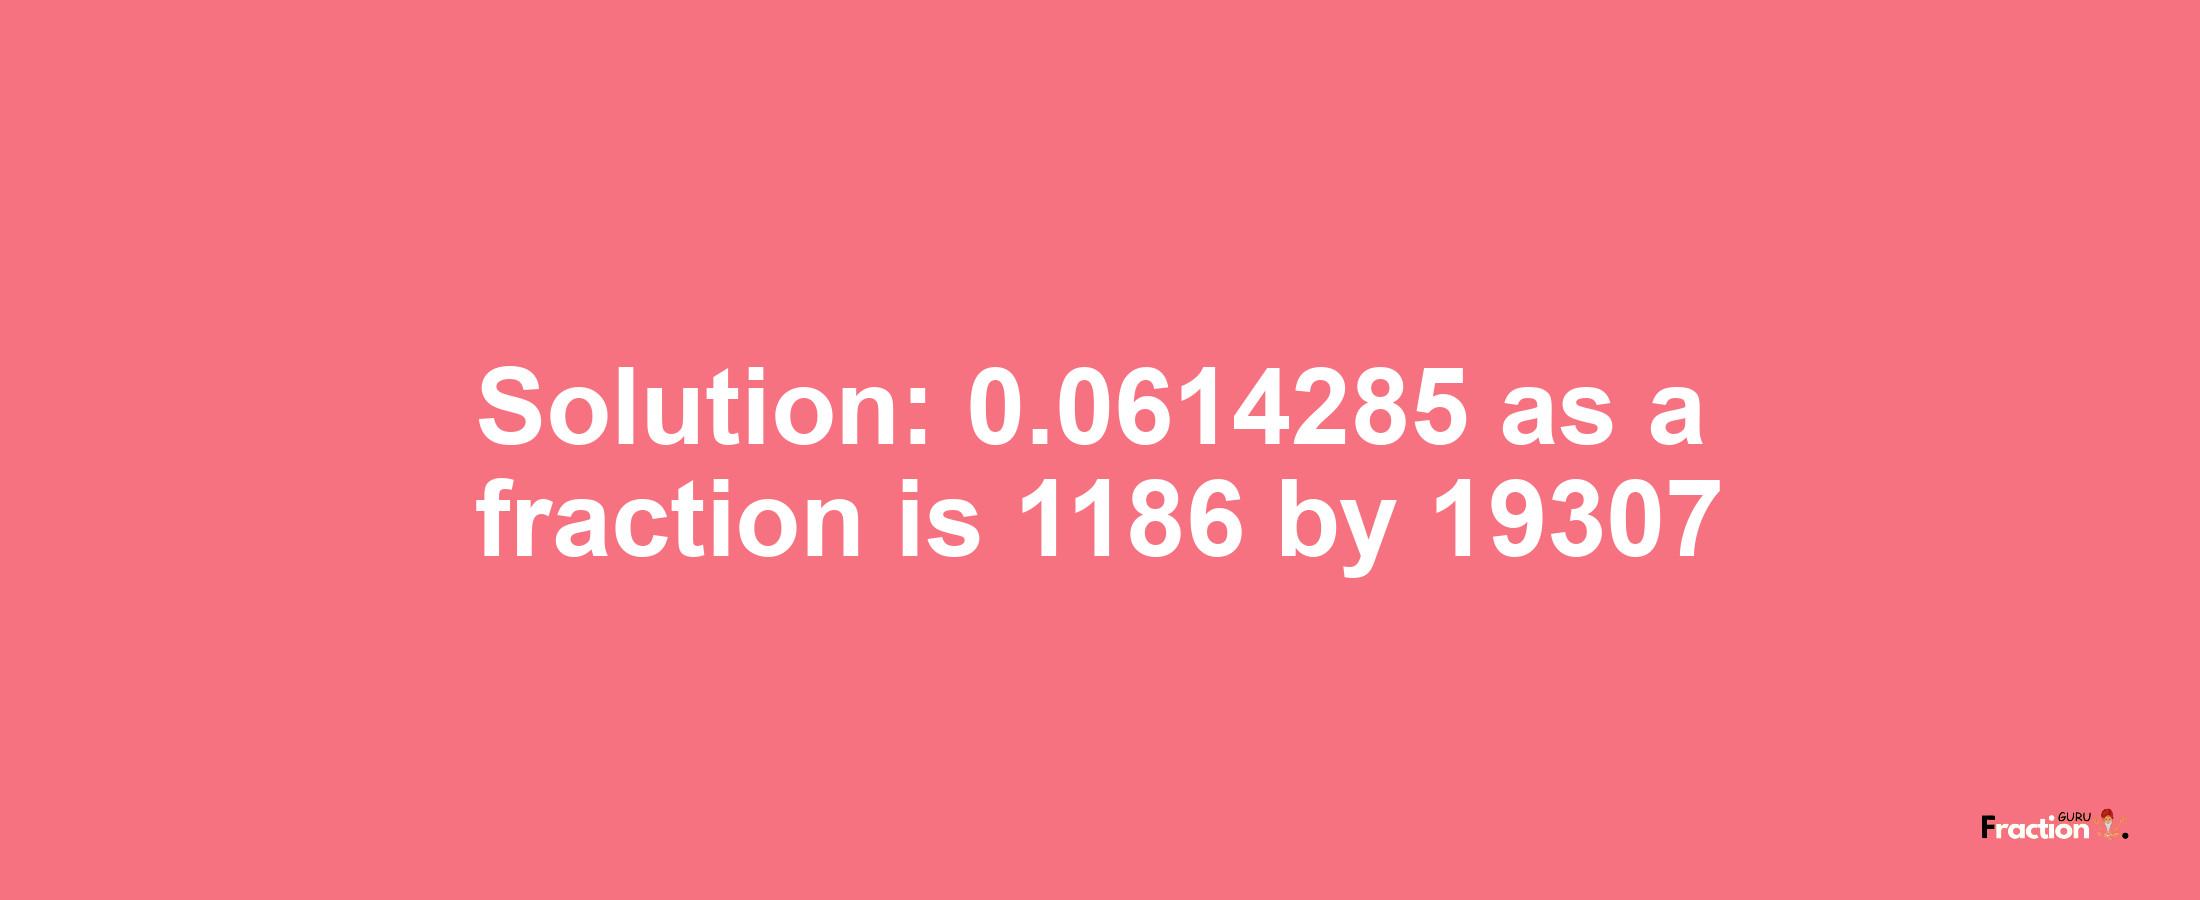 Solution:0.0614285 as a fraction is 1186/19307